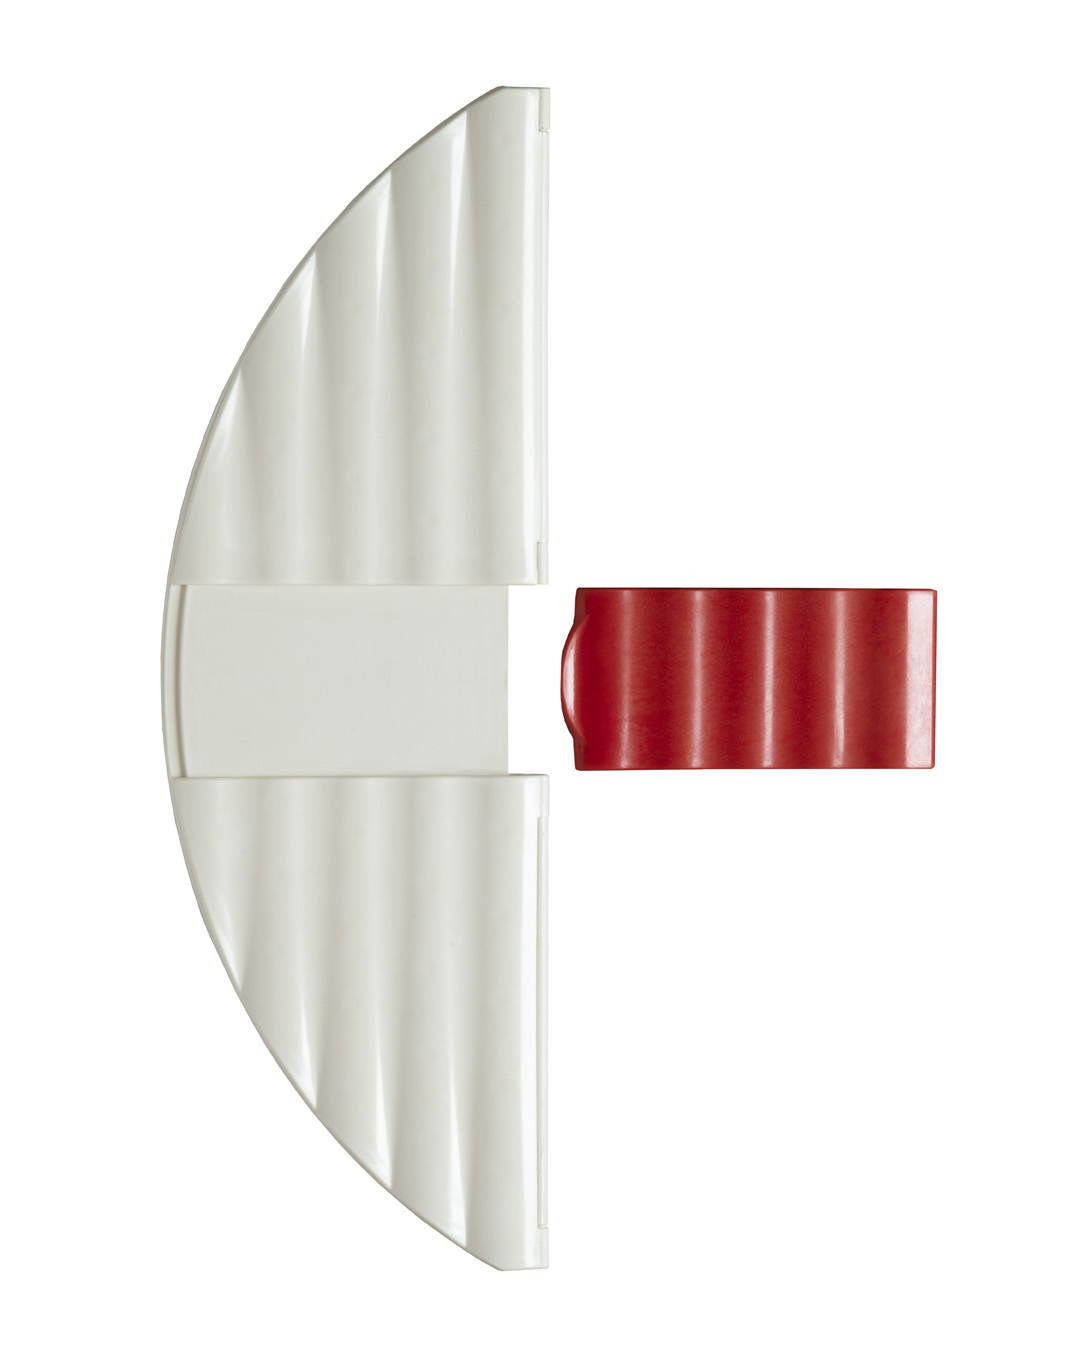 The C-PULL is designed for all reusable and disposable curtains – one size fits all